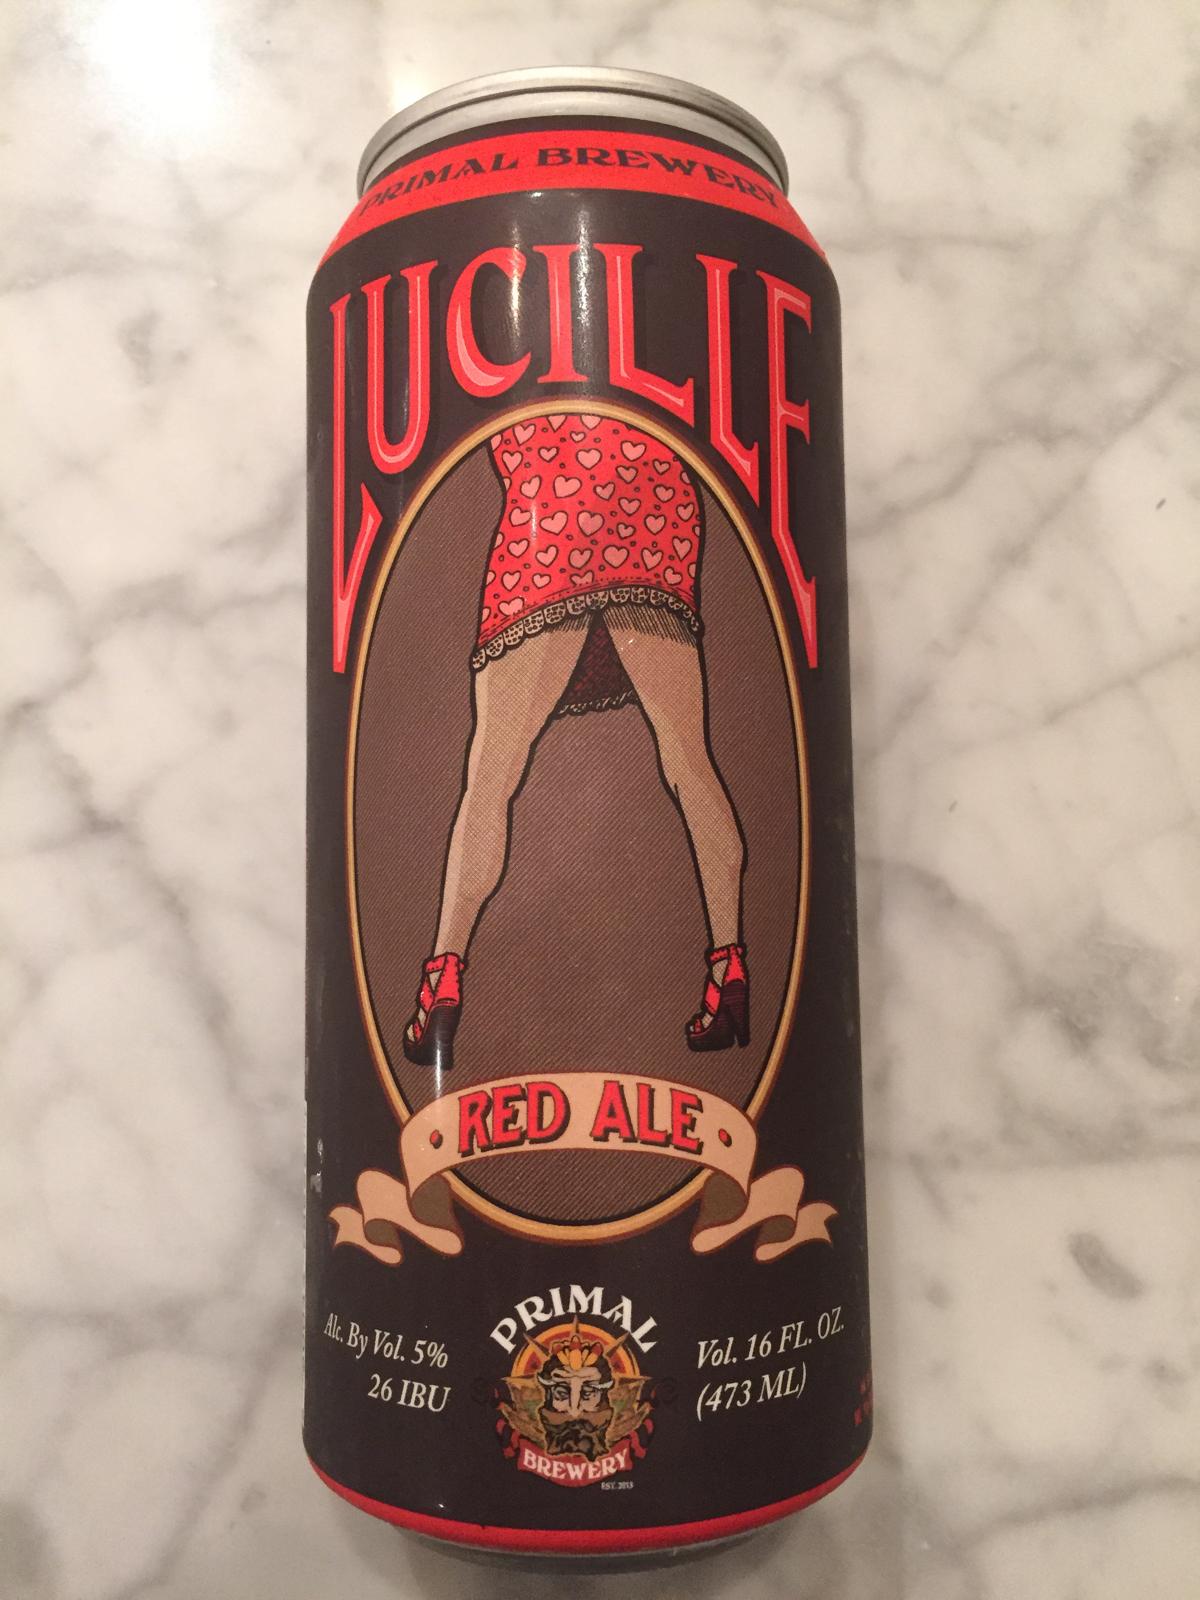 Lucille Red